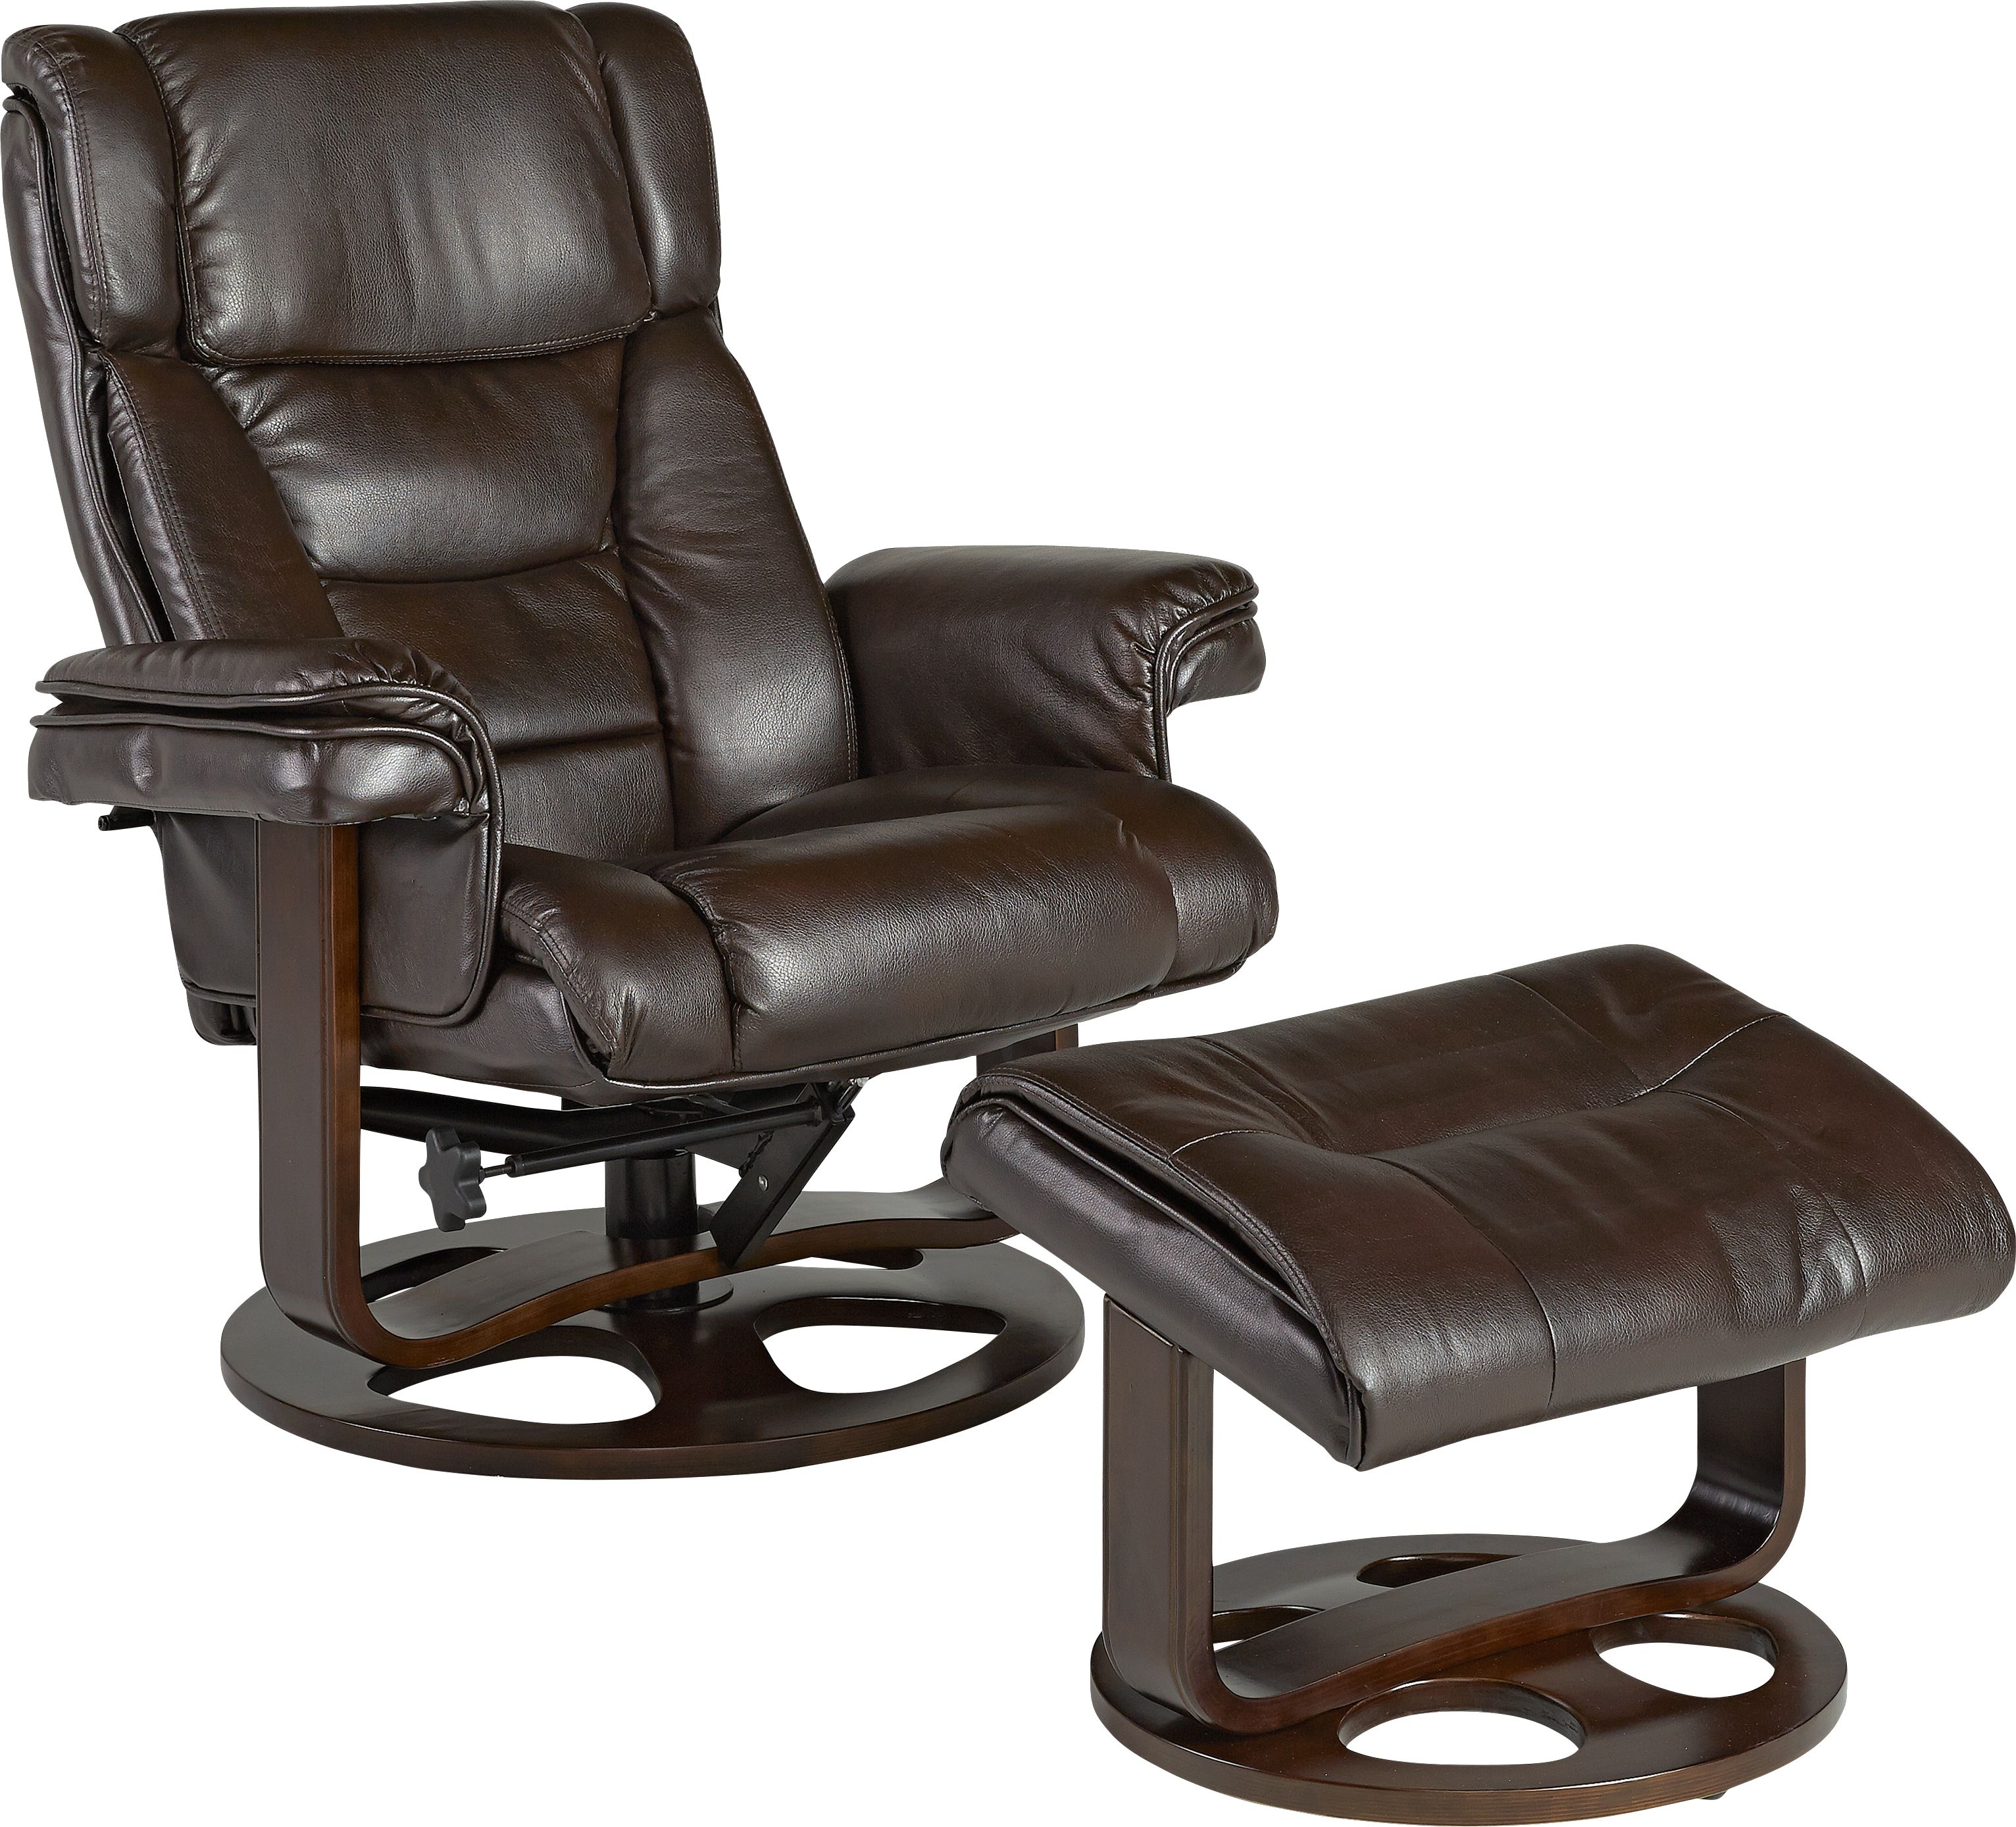 Matteo Brown Chair & Ottoman – Chairs (brown) Pertaining To Matteo Arm Sofa Chairs (View 6 of 25)